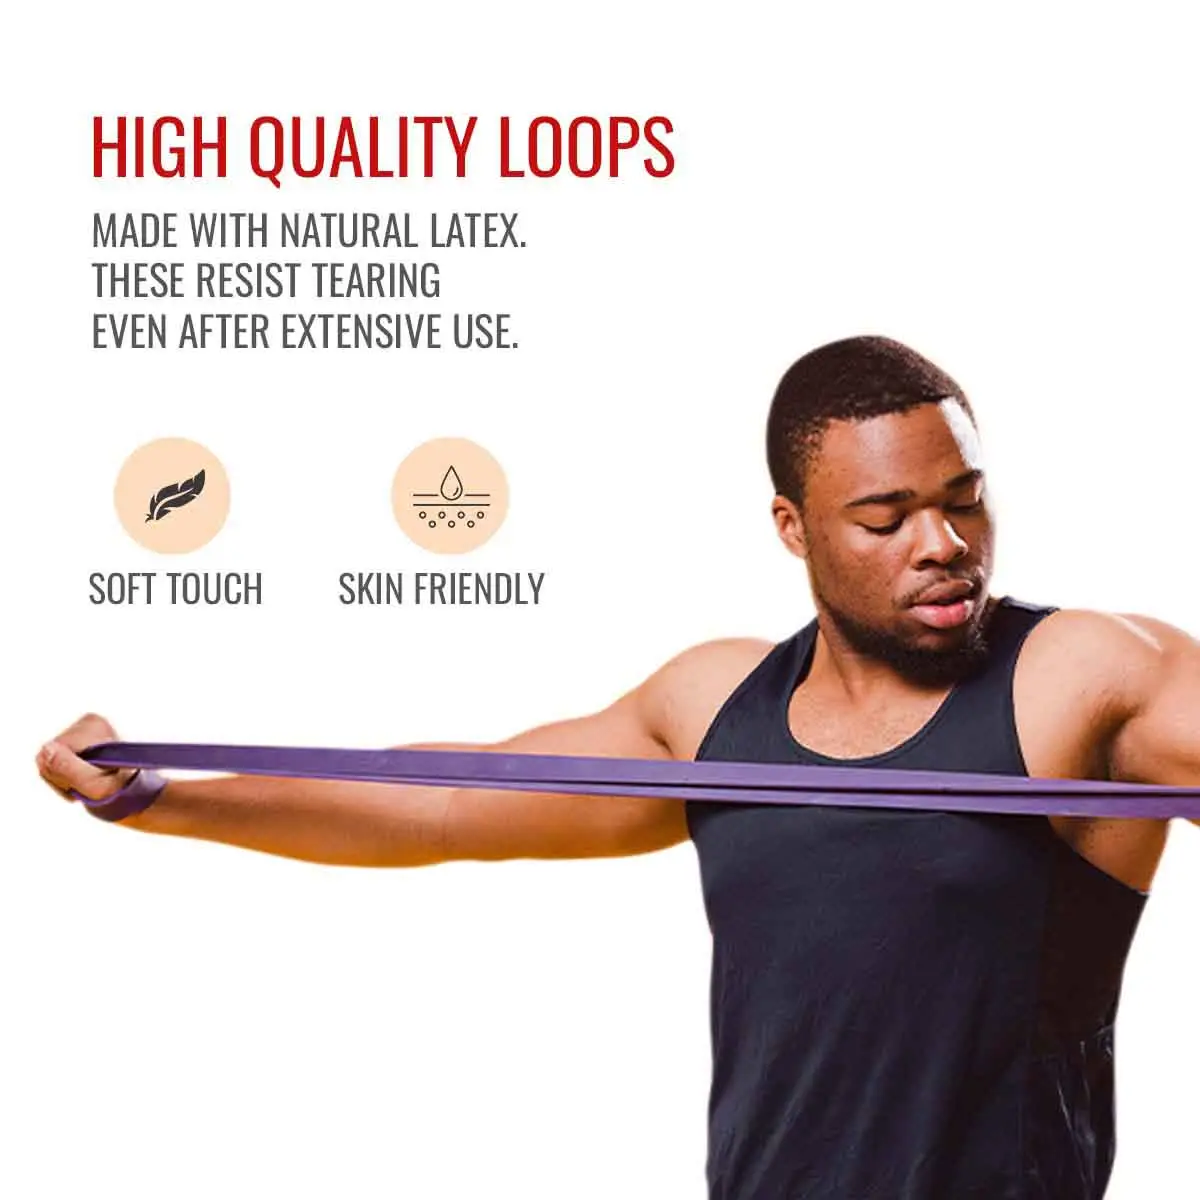 Durafit Resistance Band Orlb3 with High Quality Loops